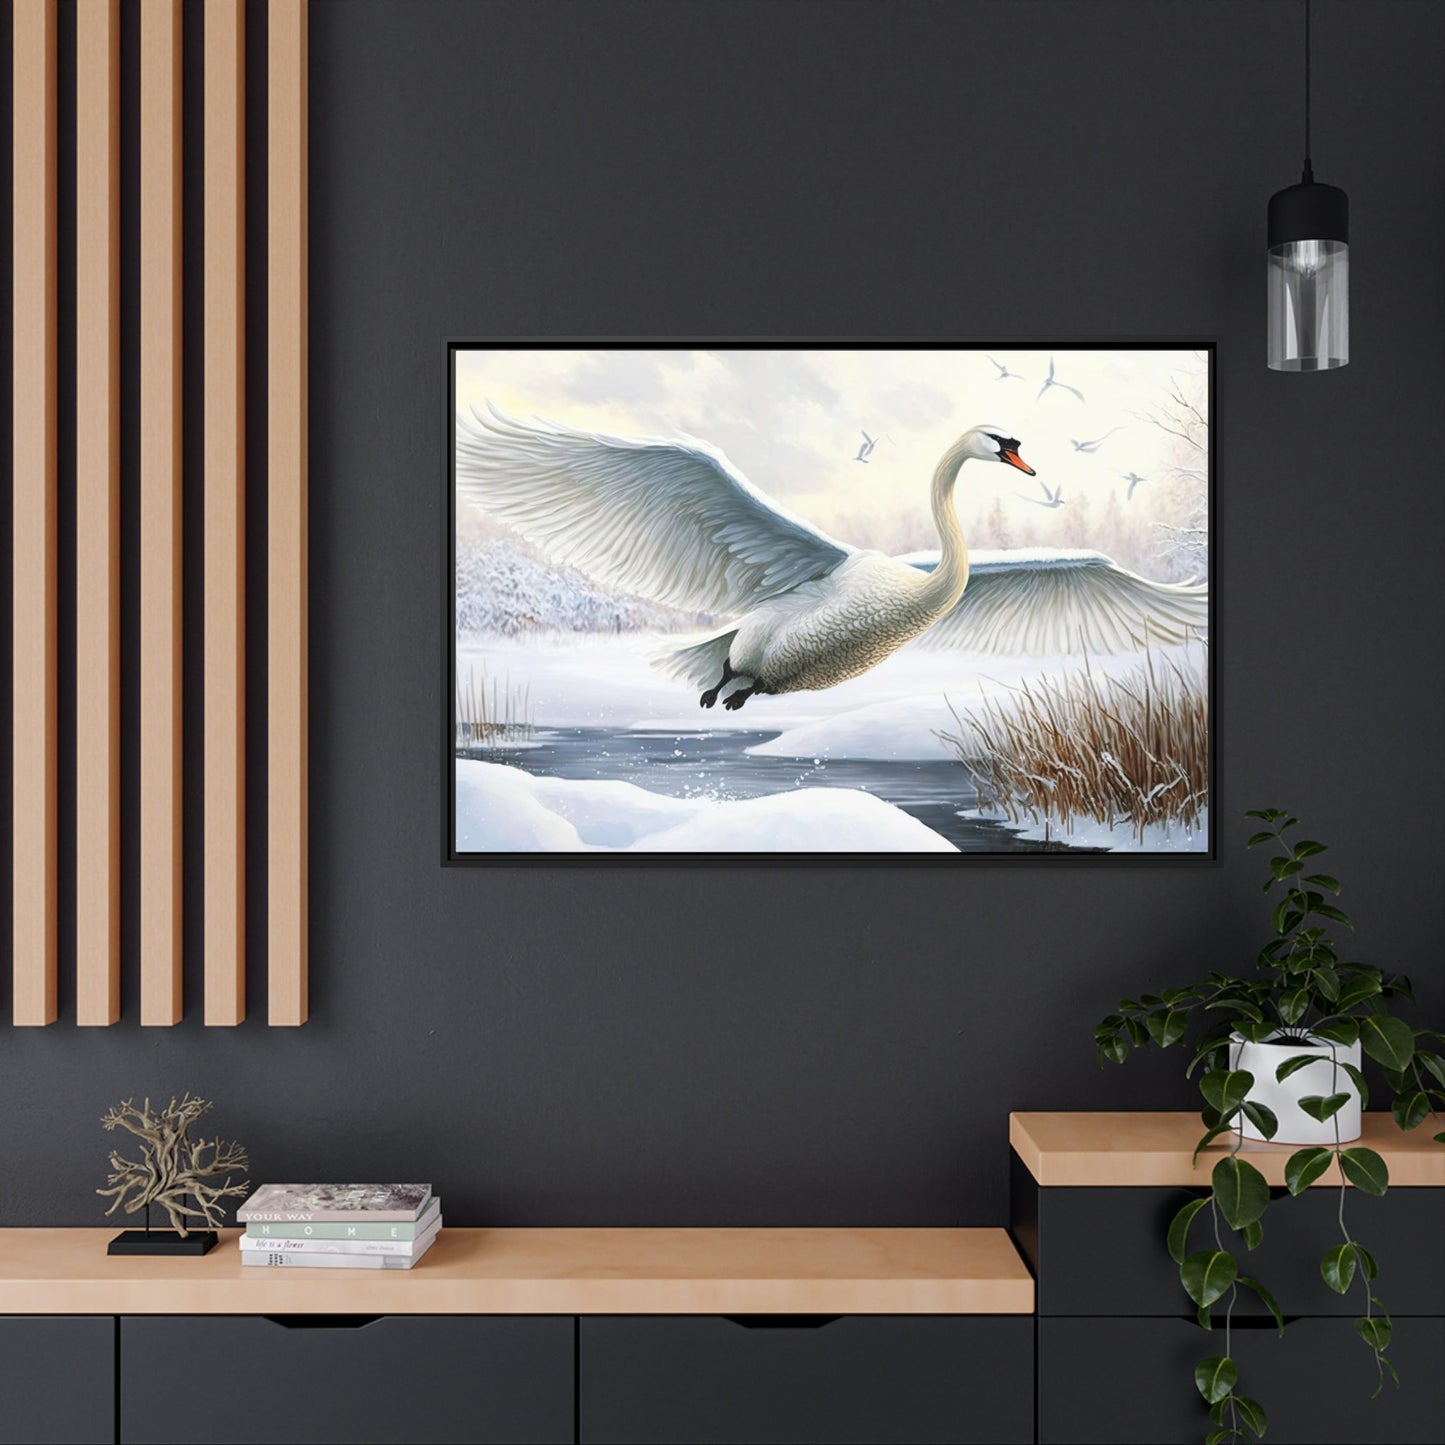 The Art of Nature: Natural Canvas Print of Swans in Their Natural Habitat